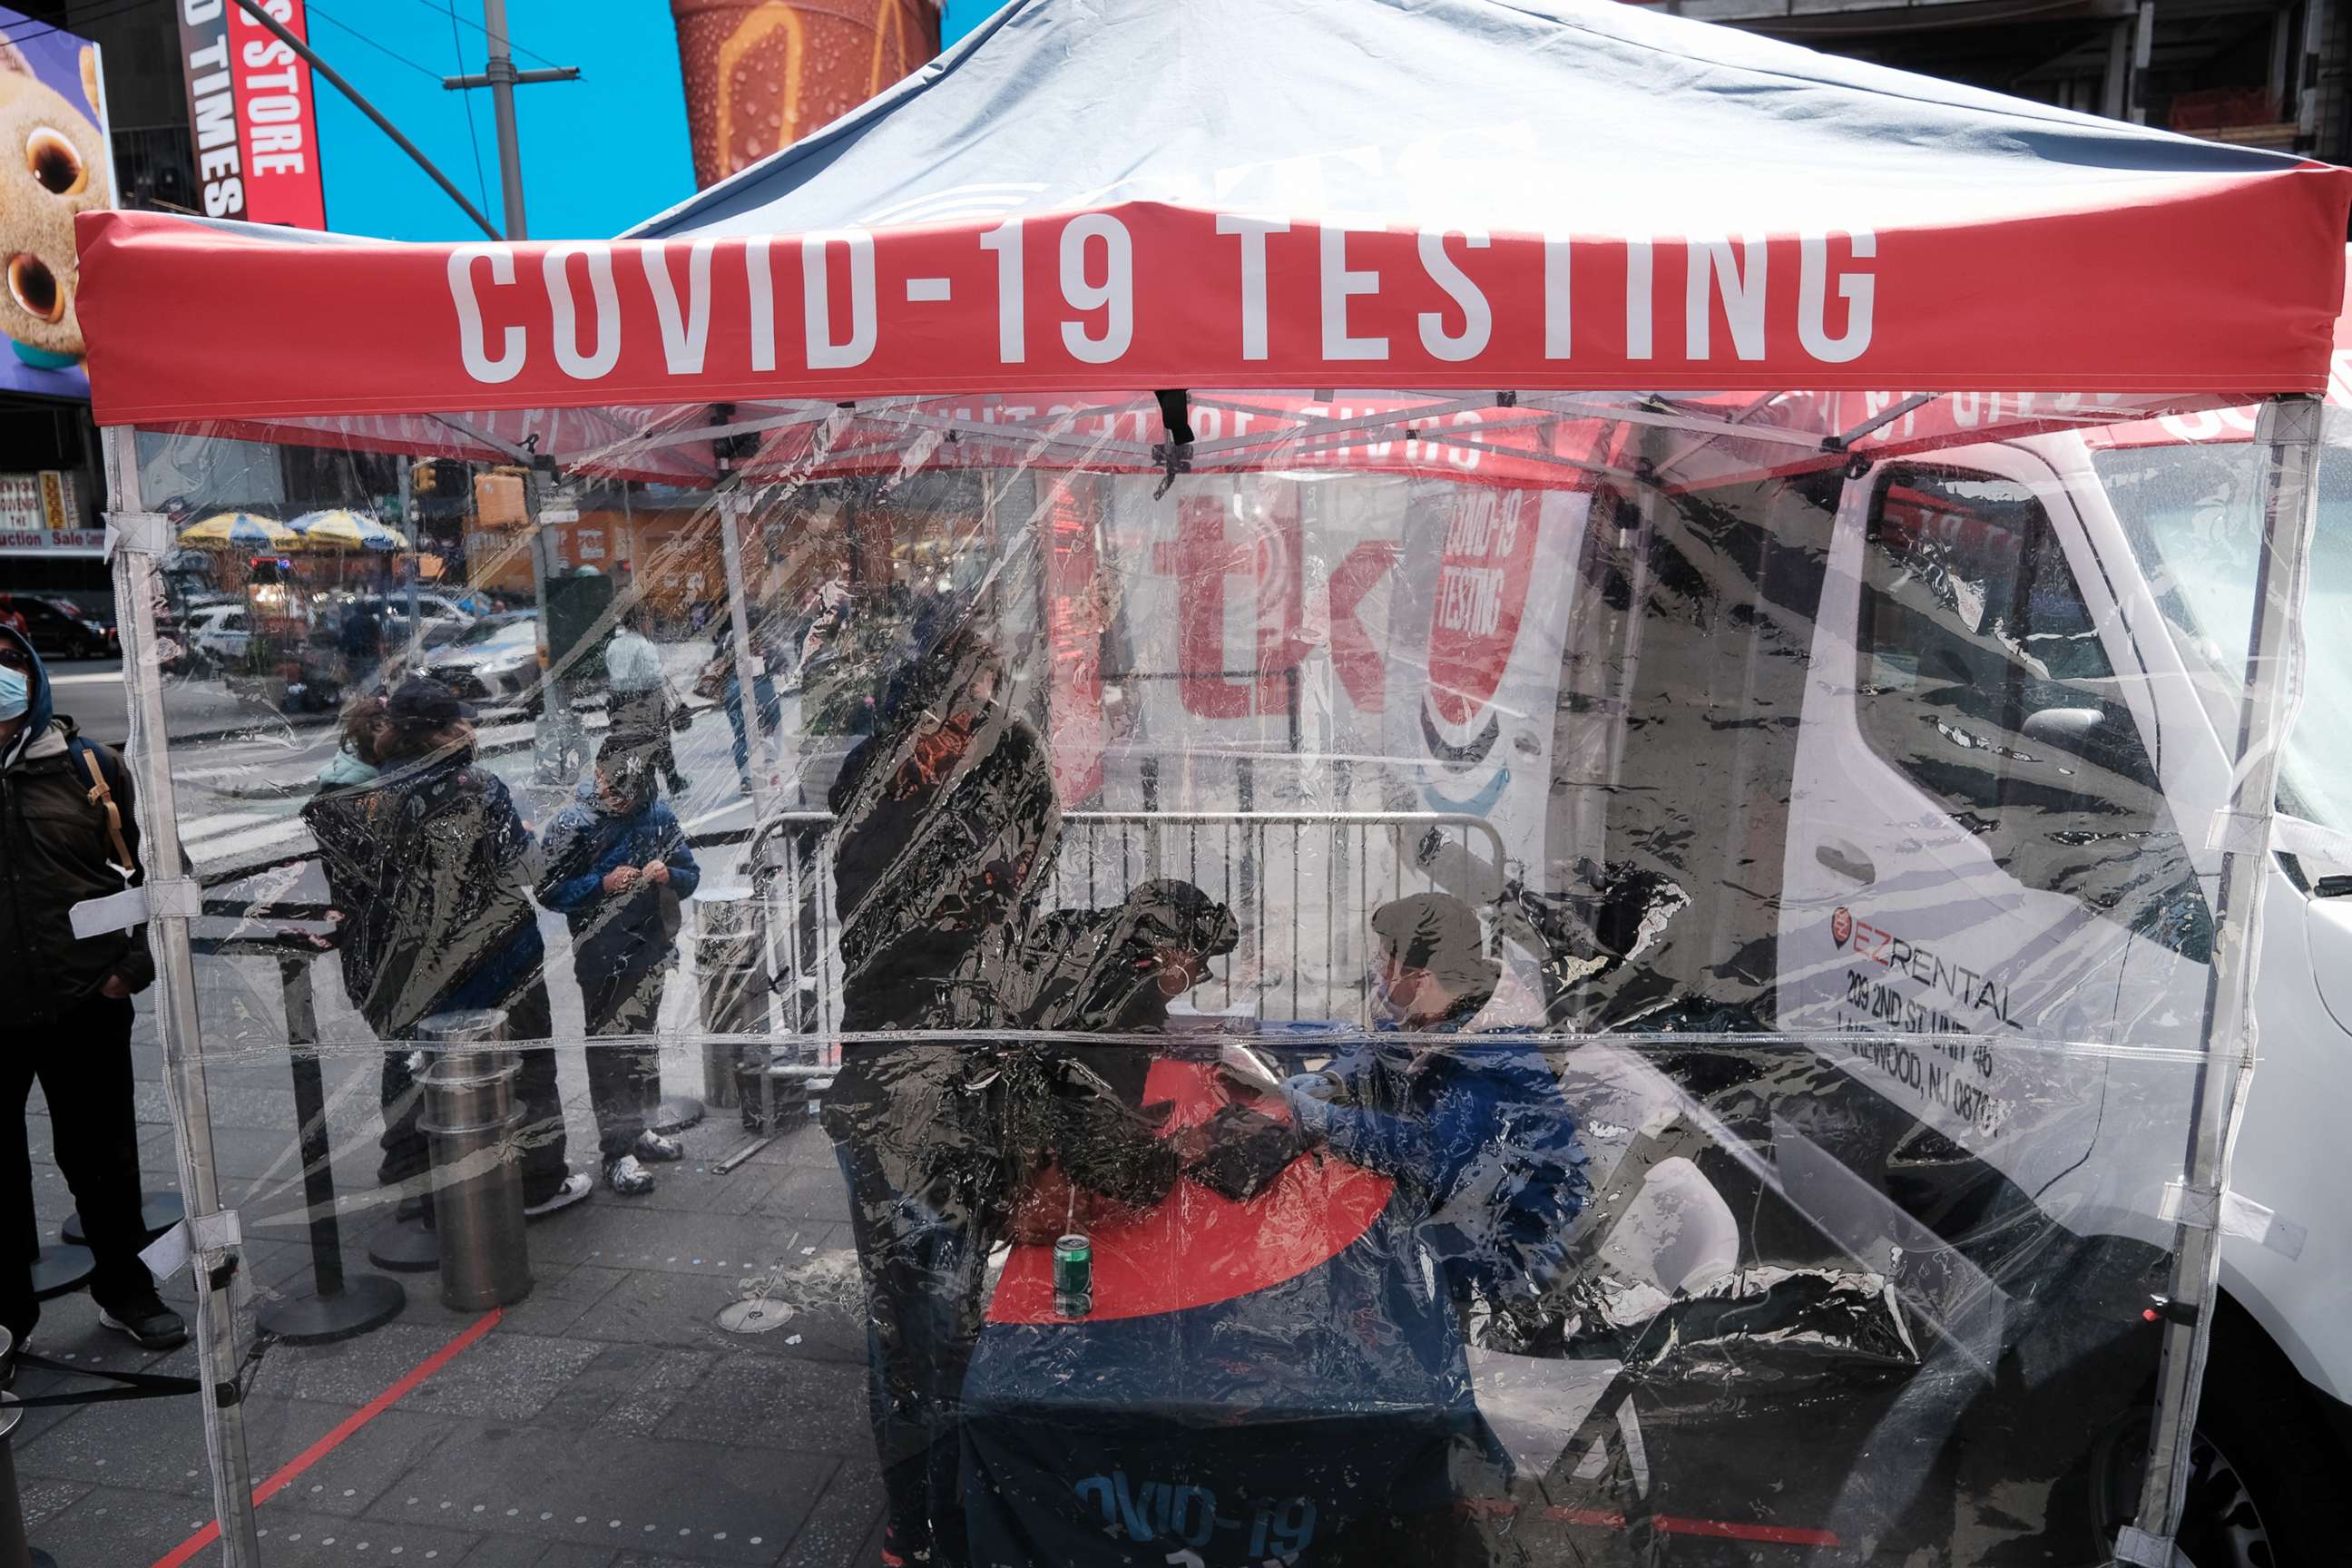 PHOTO: A Covid-19 testing tent stands in Times Square on April 27, 2022 in New York City.